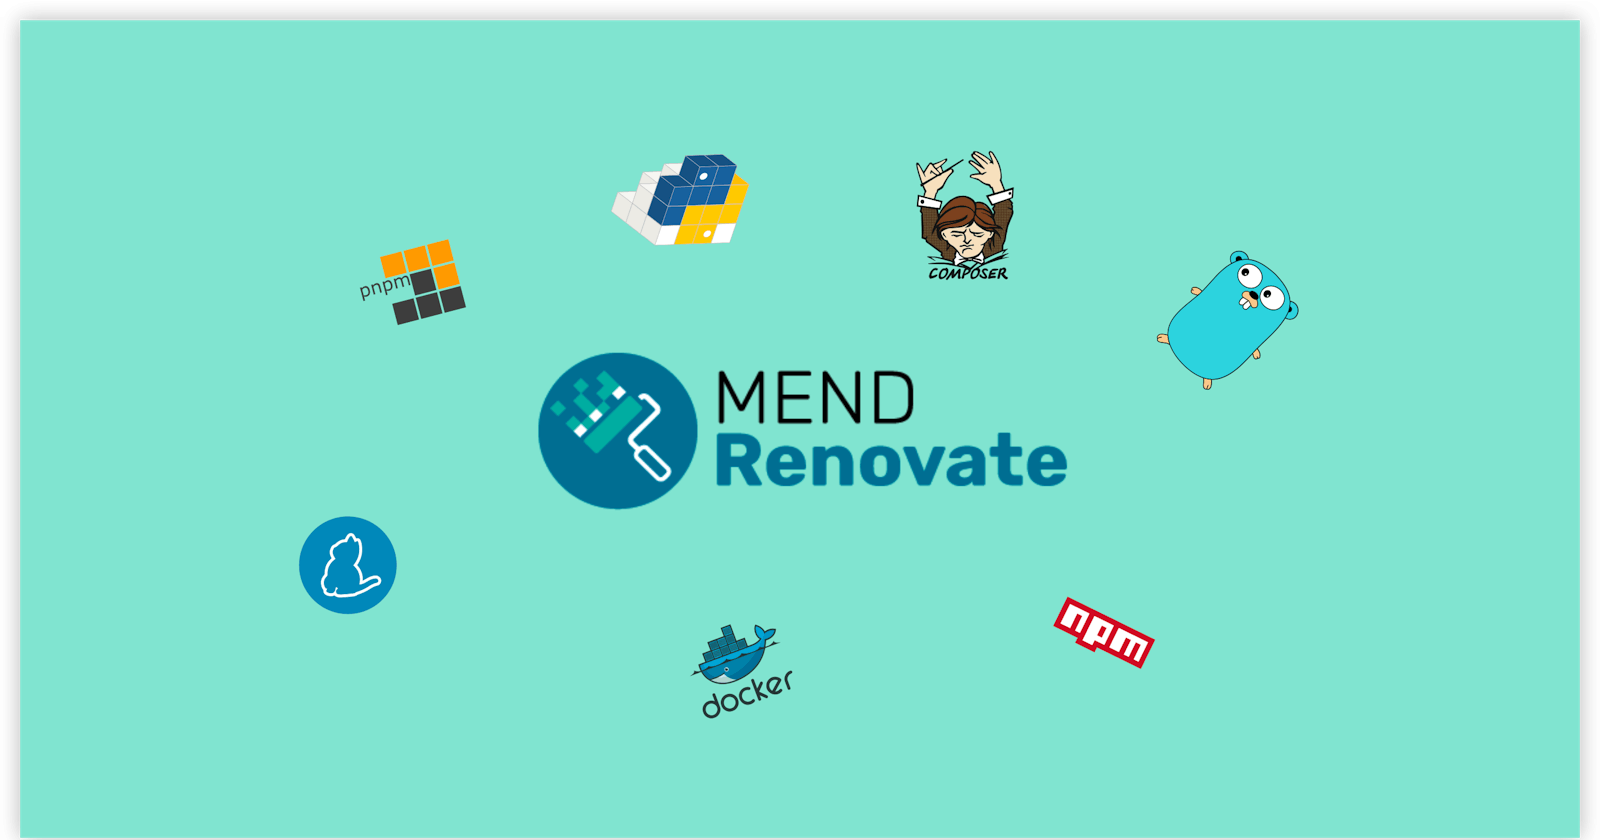 Why do you choose Renovate instead of Dependabot